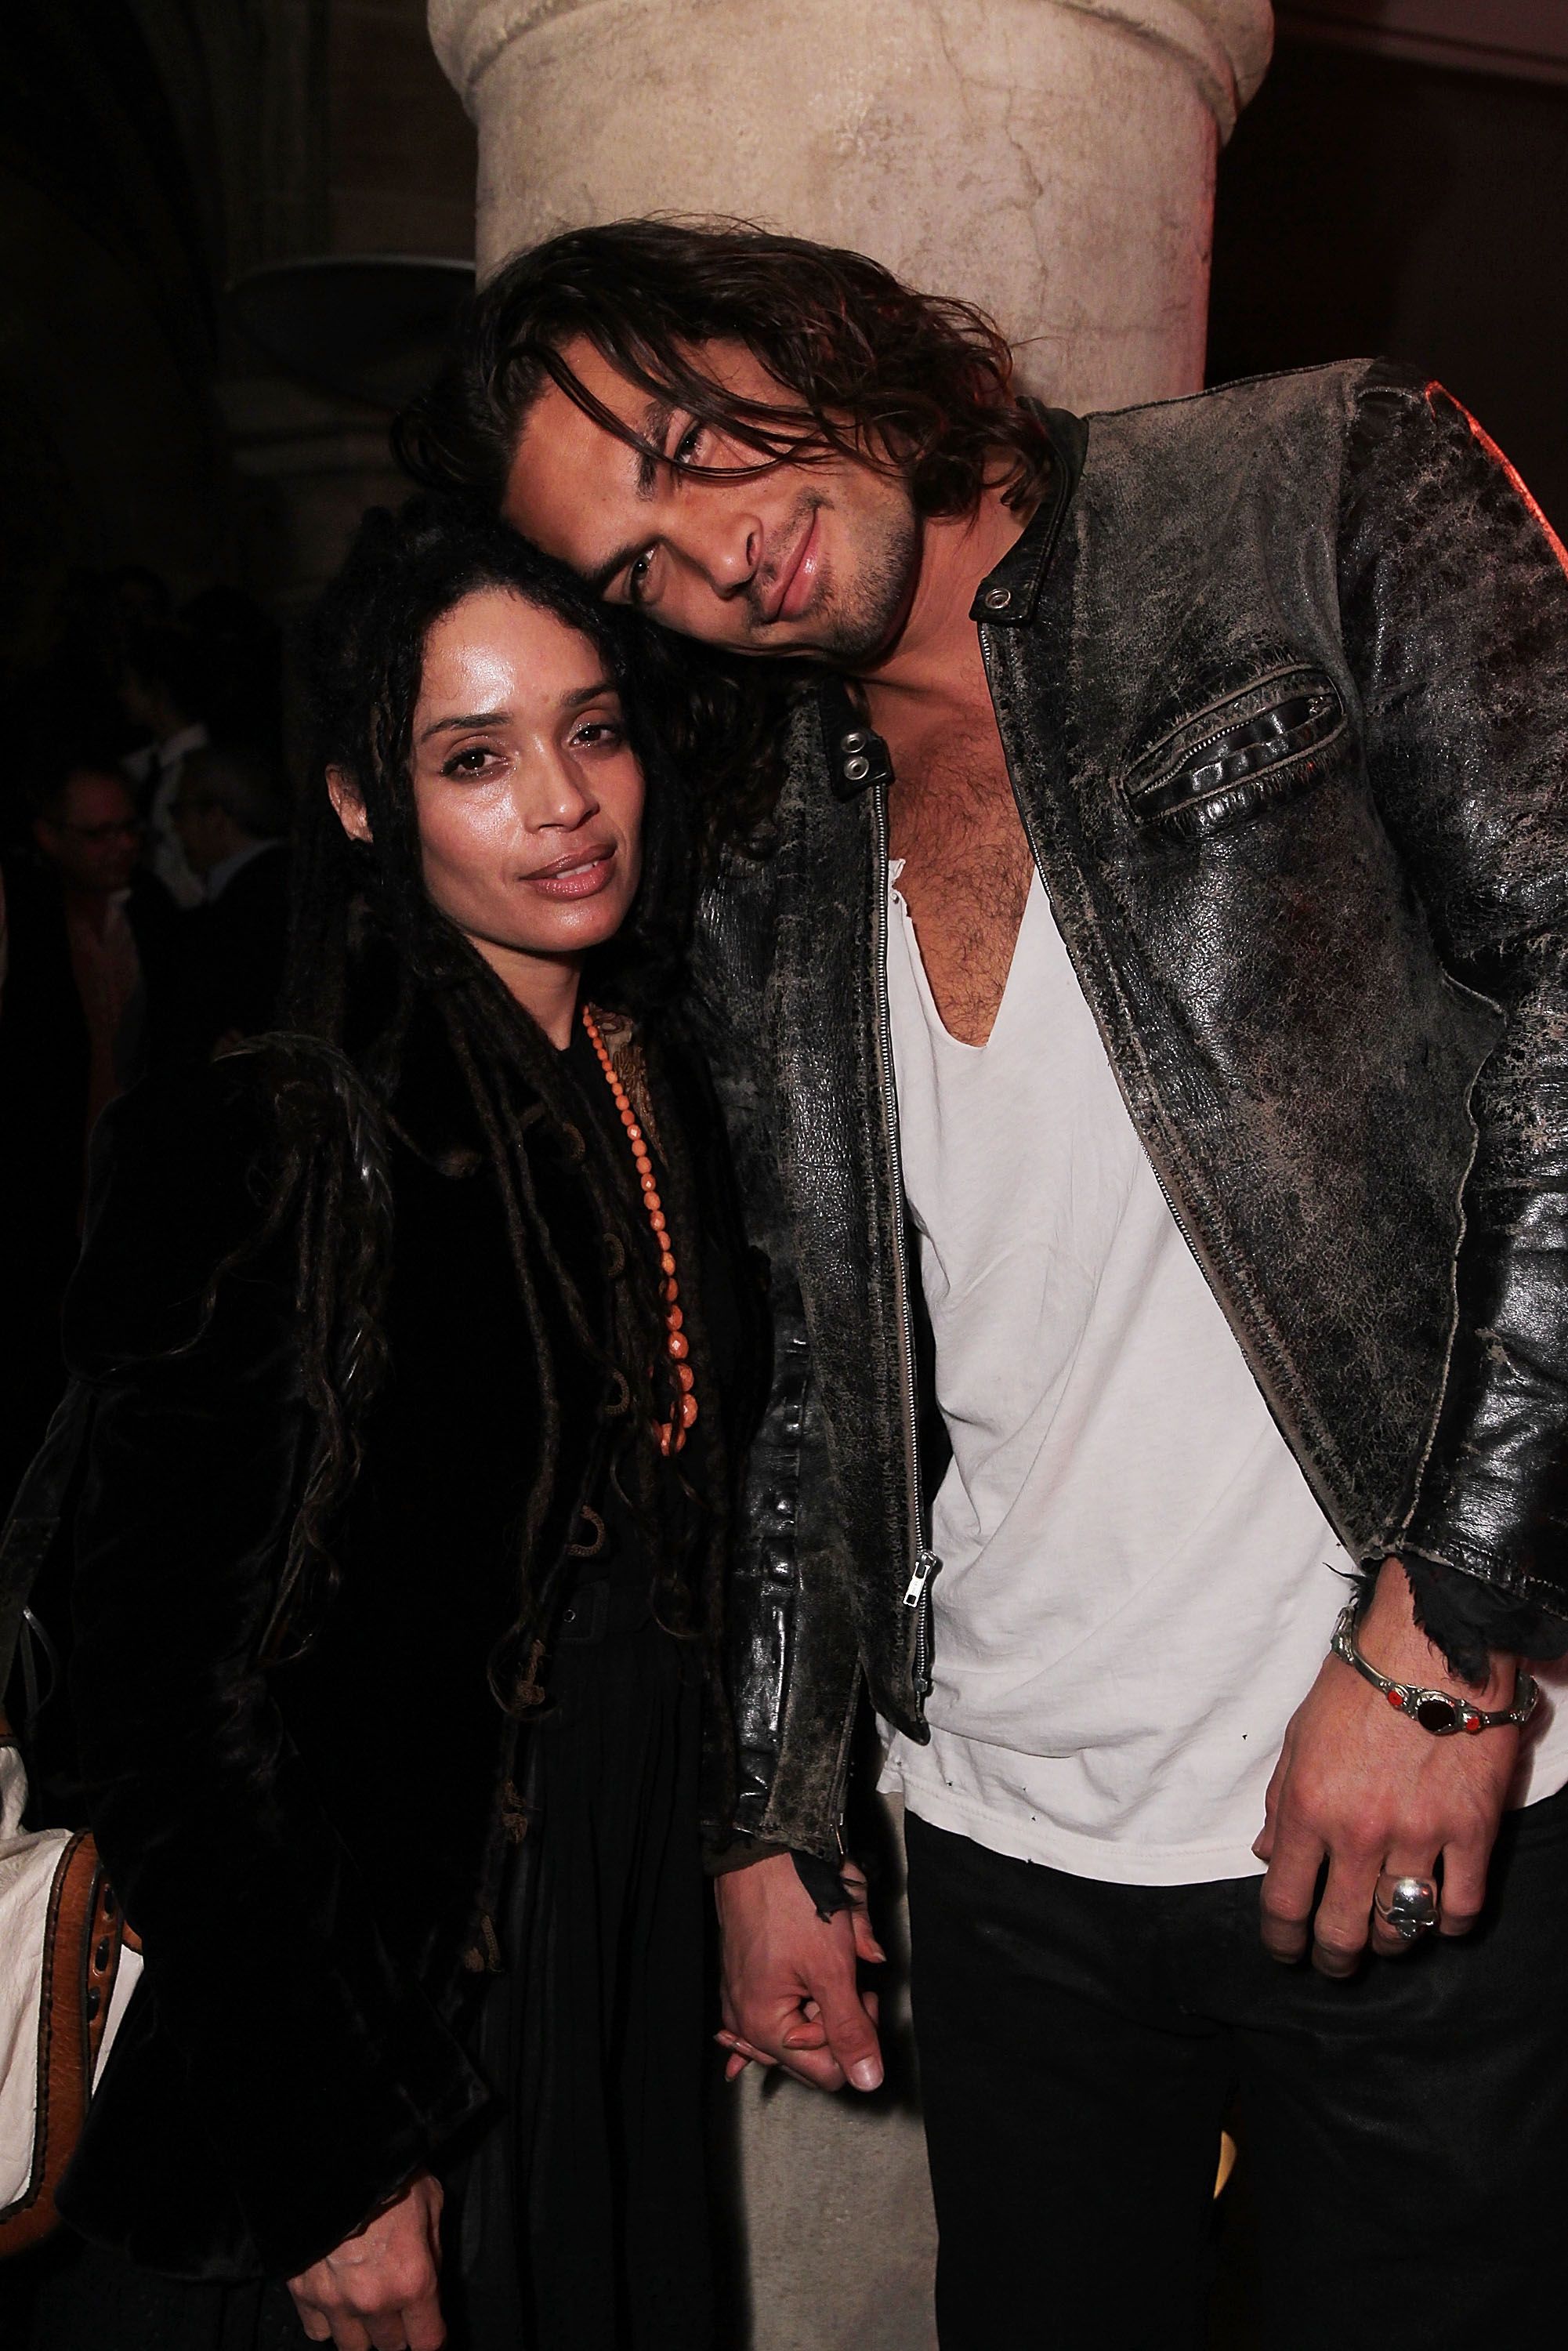 Lisa Bonet and Jason Momoa attends the Entertainment Weekly's Party at Chateau Marmont on February 25, 2010 in Los Angeles, California. | Source: Getty Images